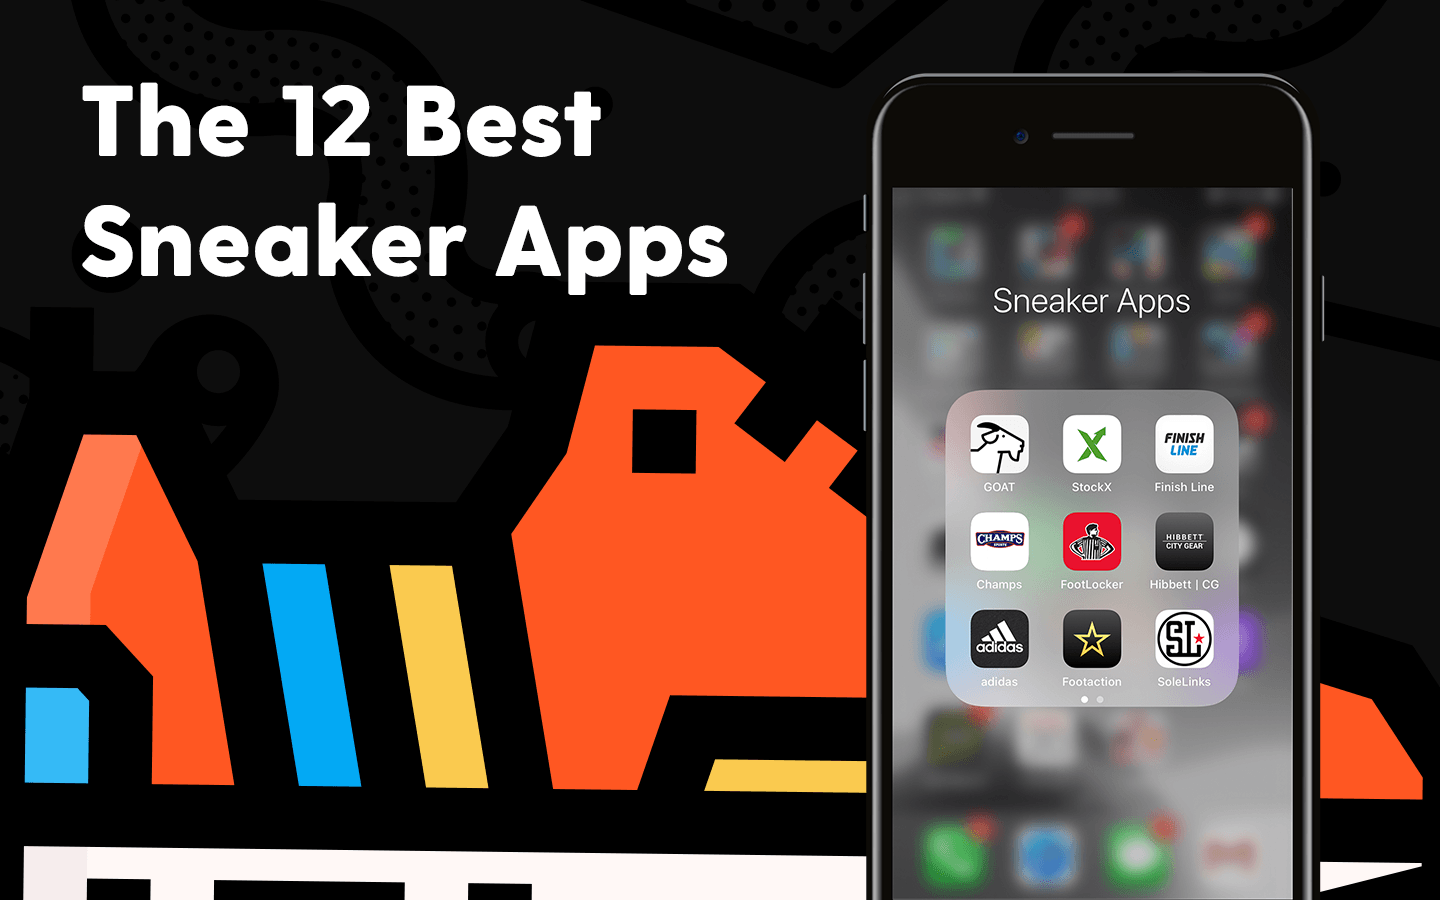 sneaker bot for android